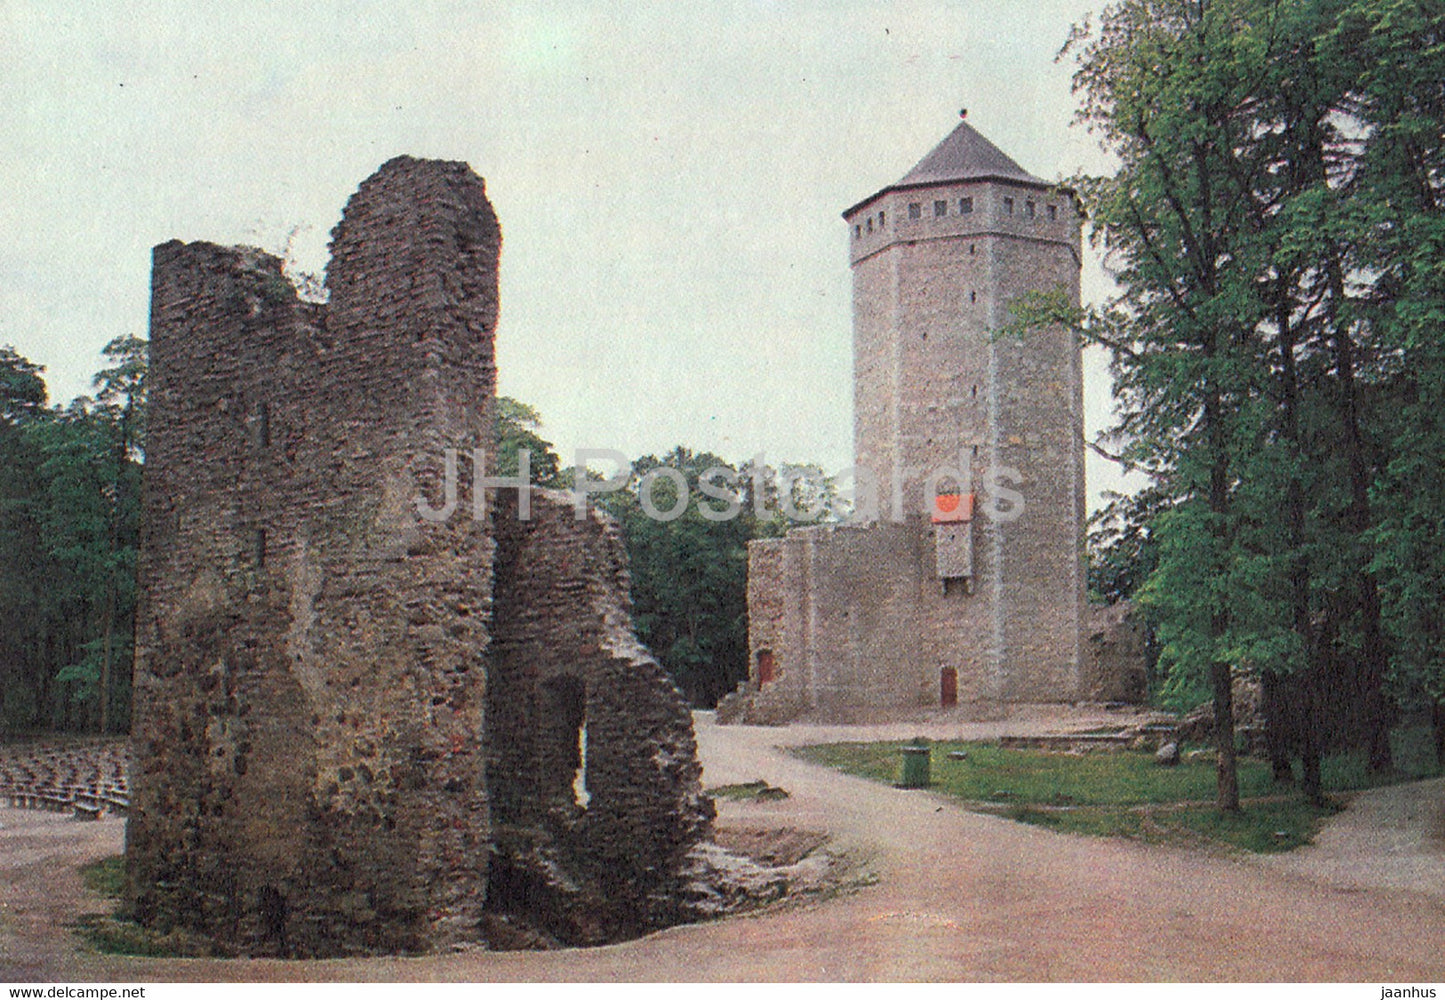 Paide - Vallimagi with a Castle Tower - 1993 - Estonia - unused - JH Postcards